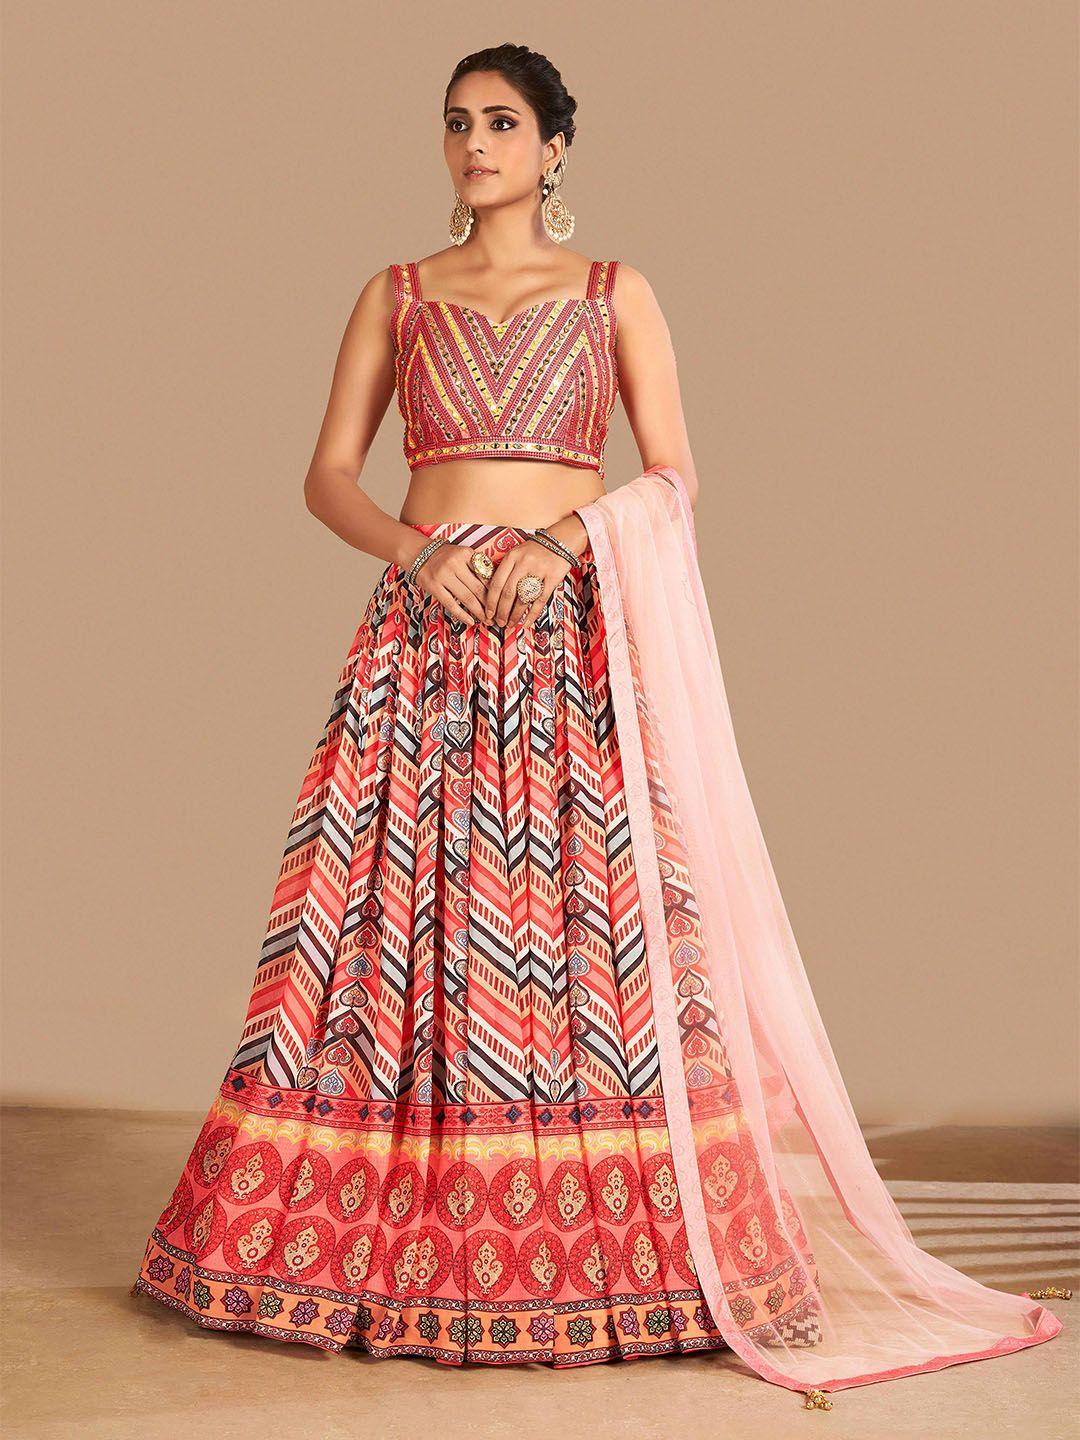 Fusionic Pink & White Embroidered Semi-Stitched Lehenga & Unstitched Blouse With Dupatta